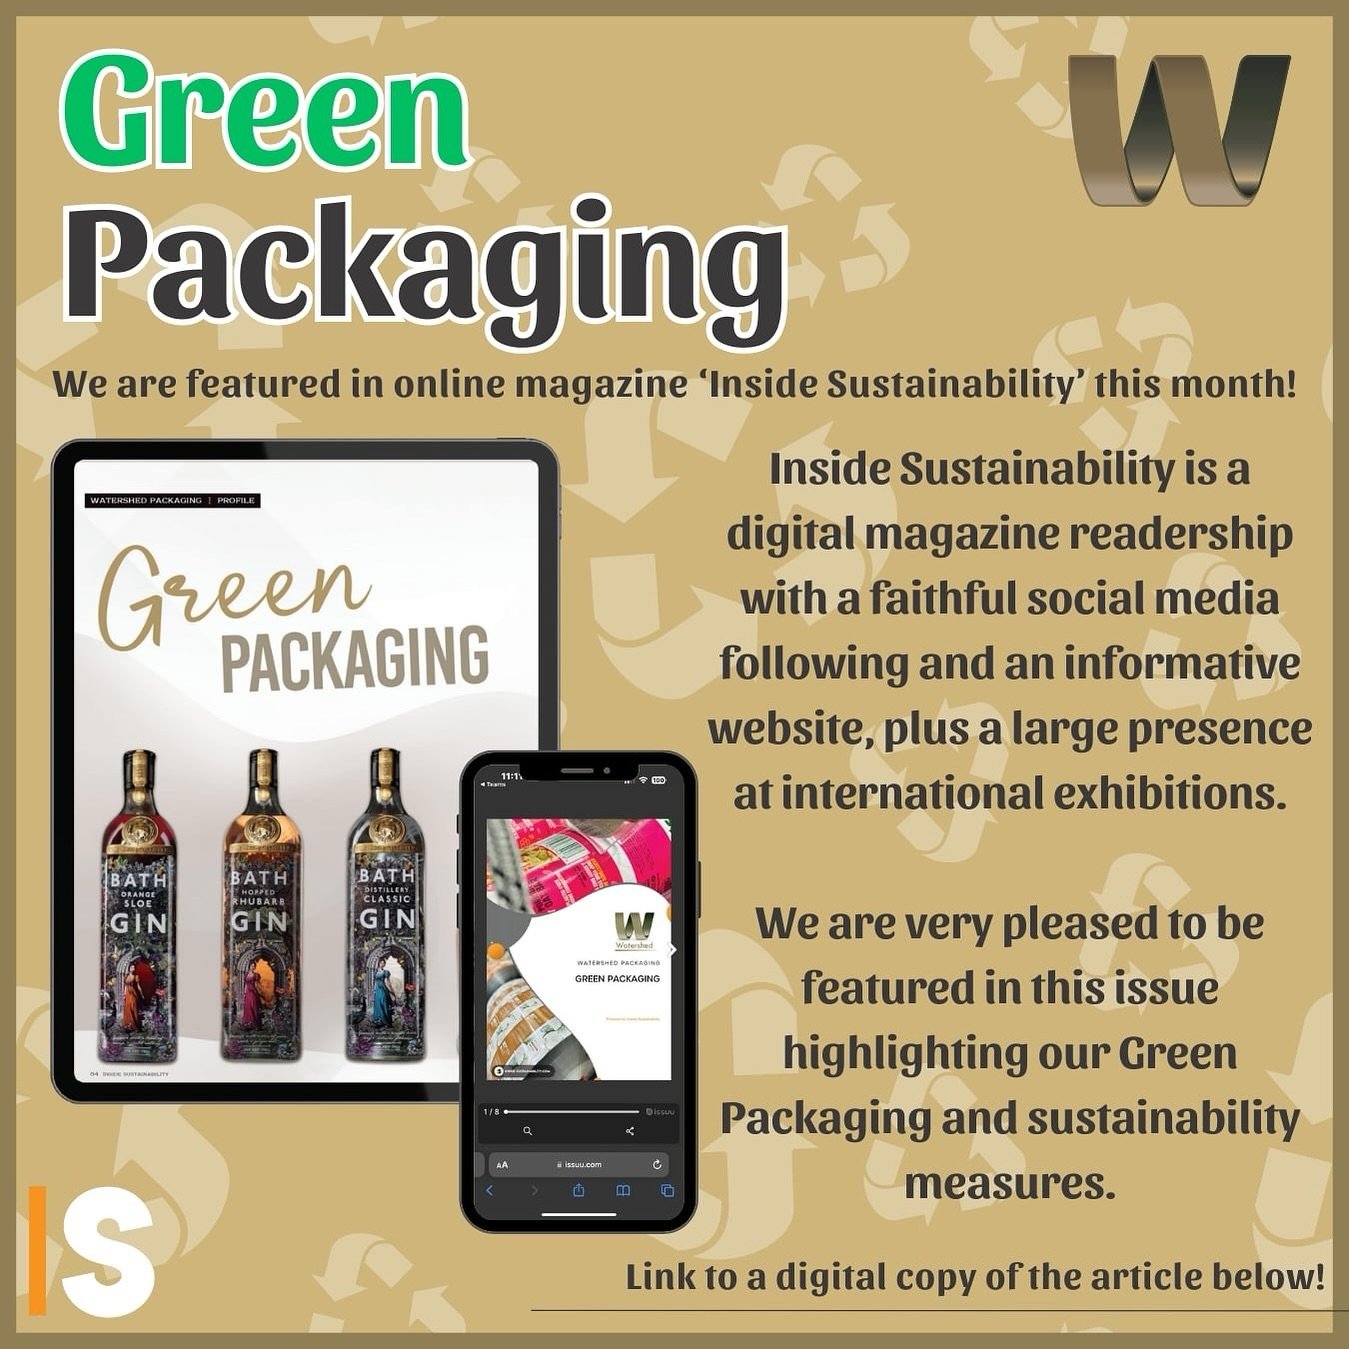 🌲🌎💚 Green Packaging 💚🌎🌲 

📖 We have a feature in this months edition of Inside Sustainability magazine discussing our flexible, innovative work and conscientious sustainability measures.

💥 Did you know we are part of the government carbon re